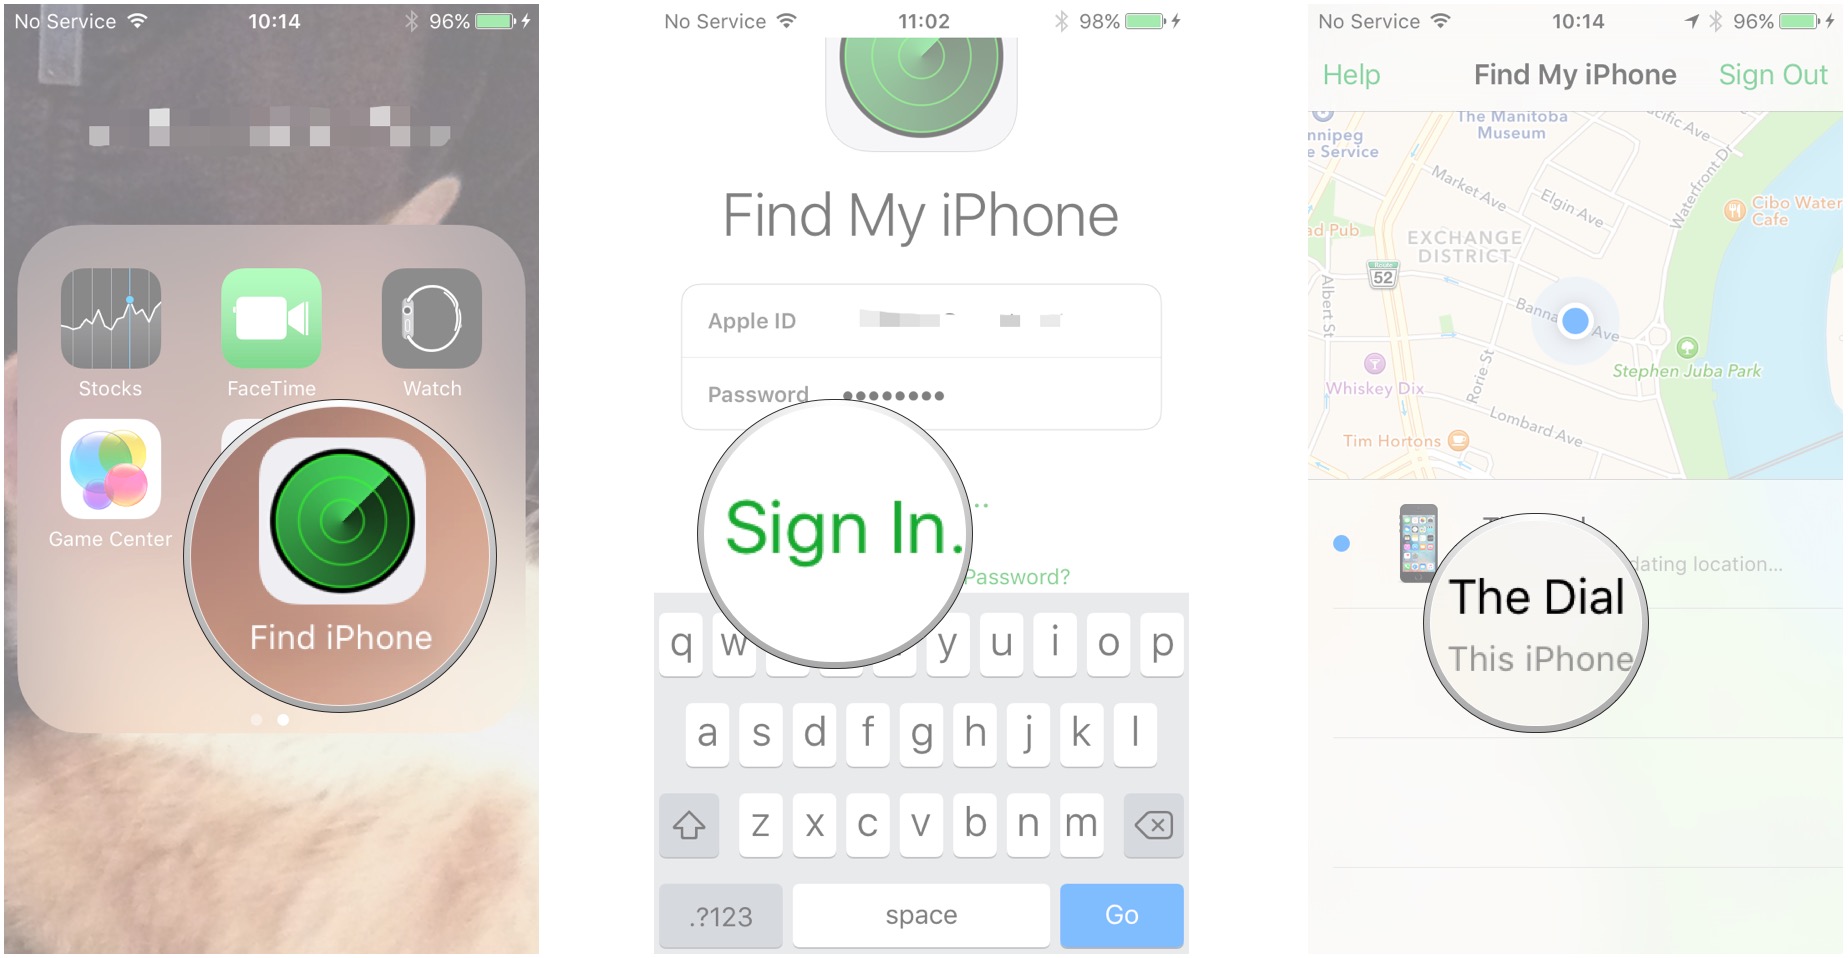 How to remove Activation Lock and turn off Find My iPhone on iPhone or